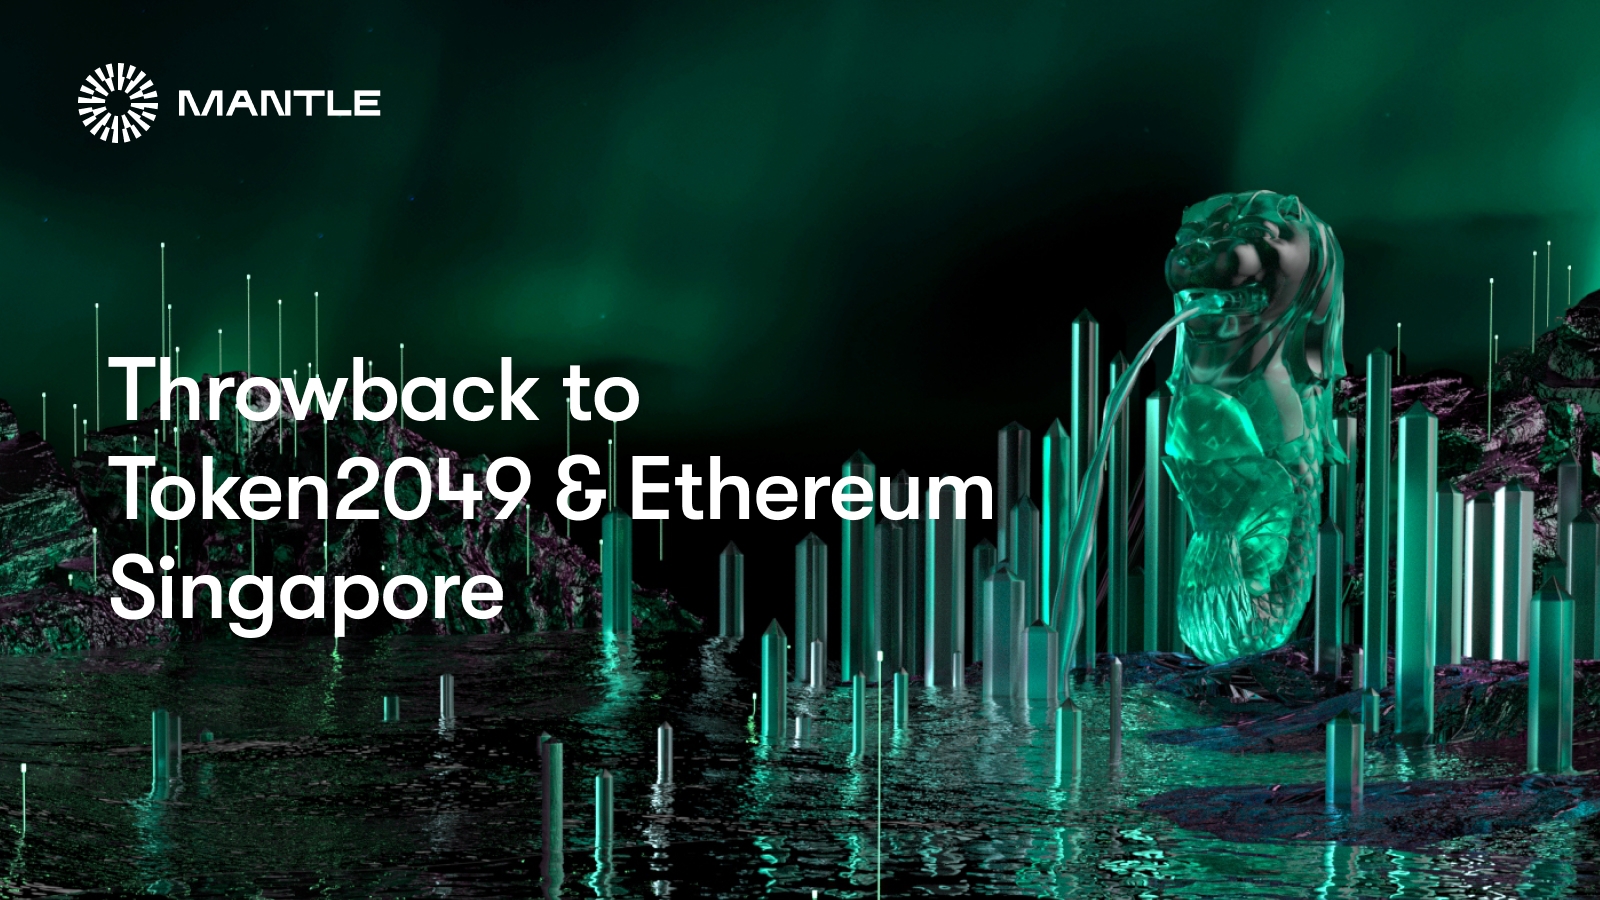 Token2049 & Ethereum Singapore Throwback With Mantle